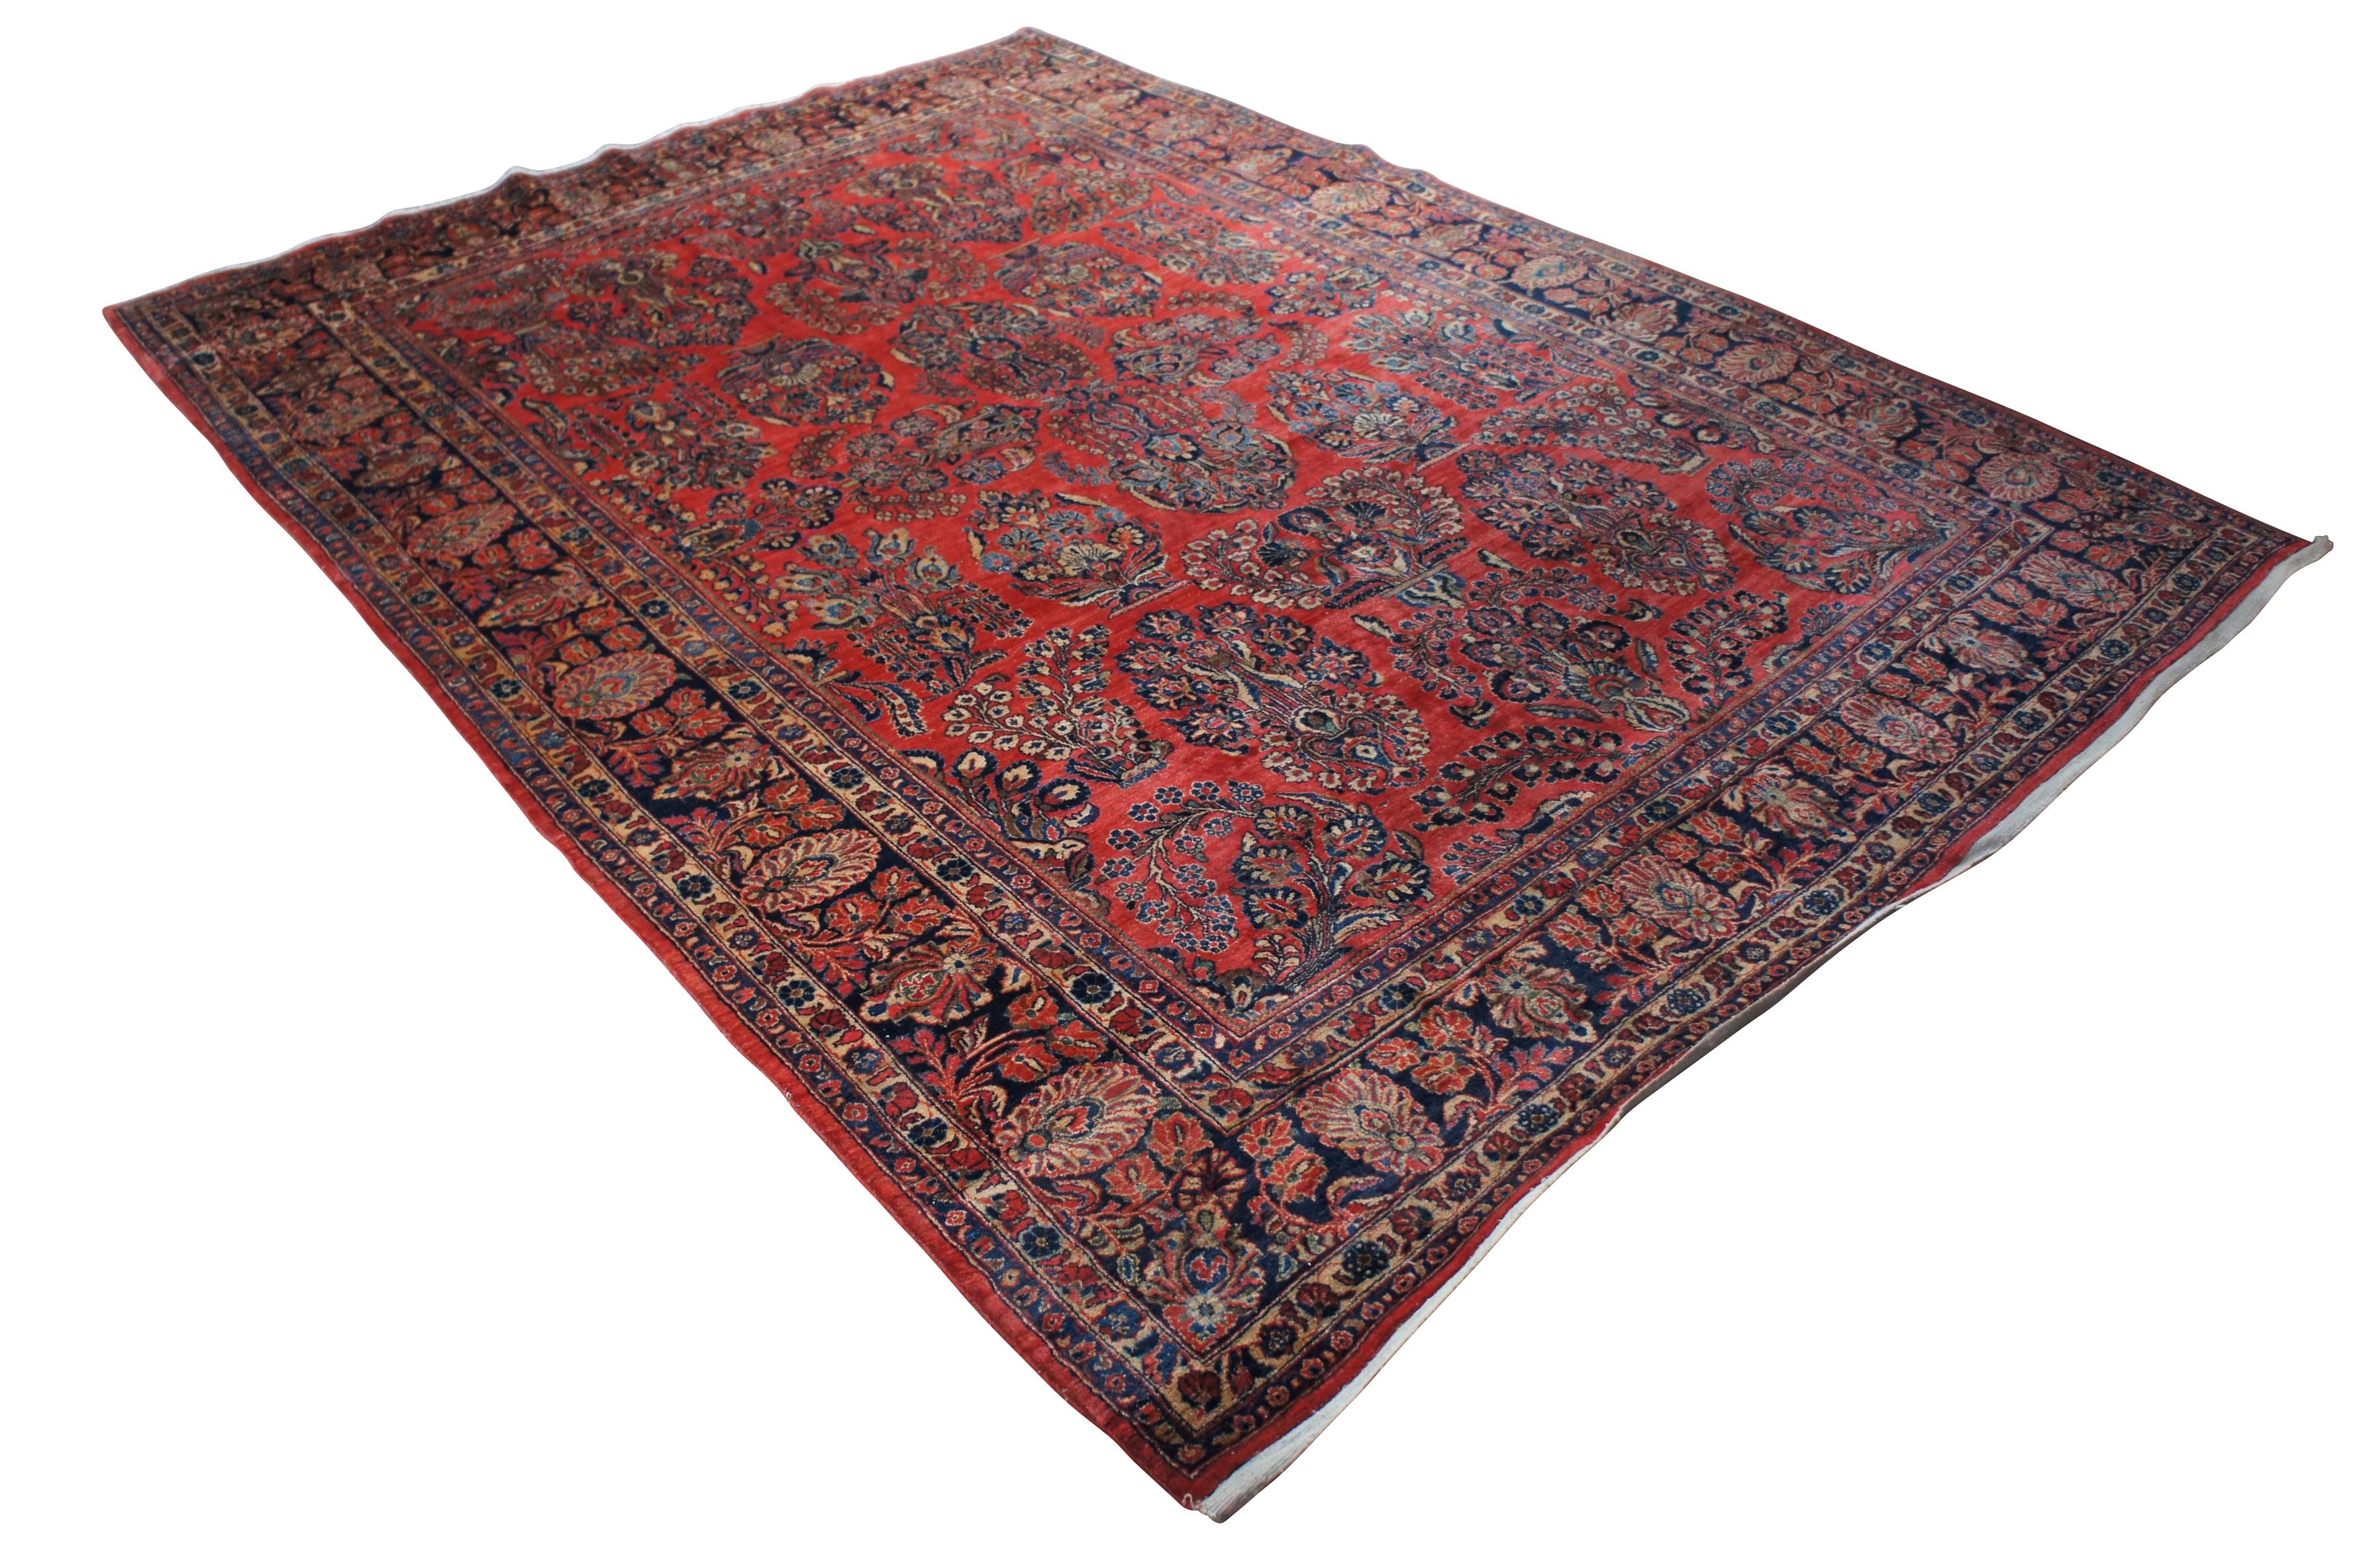 Vintage Persian Sarouk Hand Knotted Red Floral Wool Area Rug Carpet 9' x 12' In Good Condition For Sale In Dayton, OH